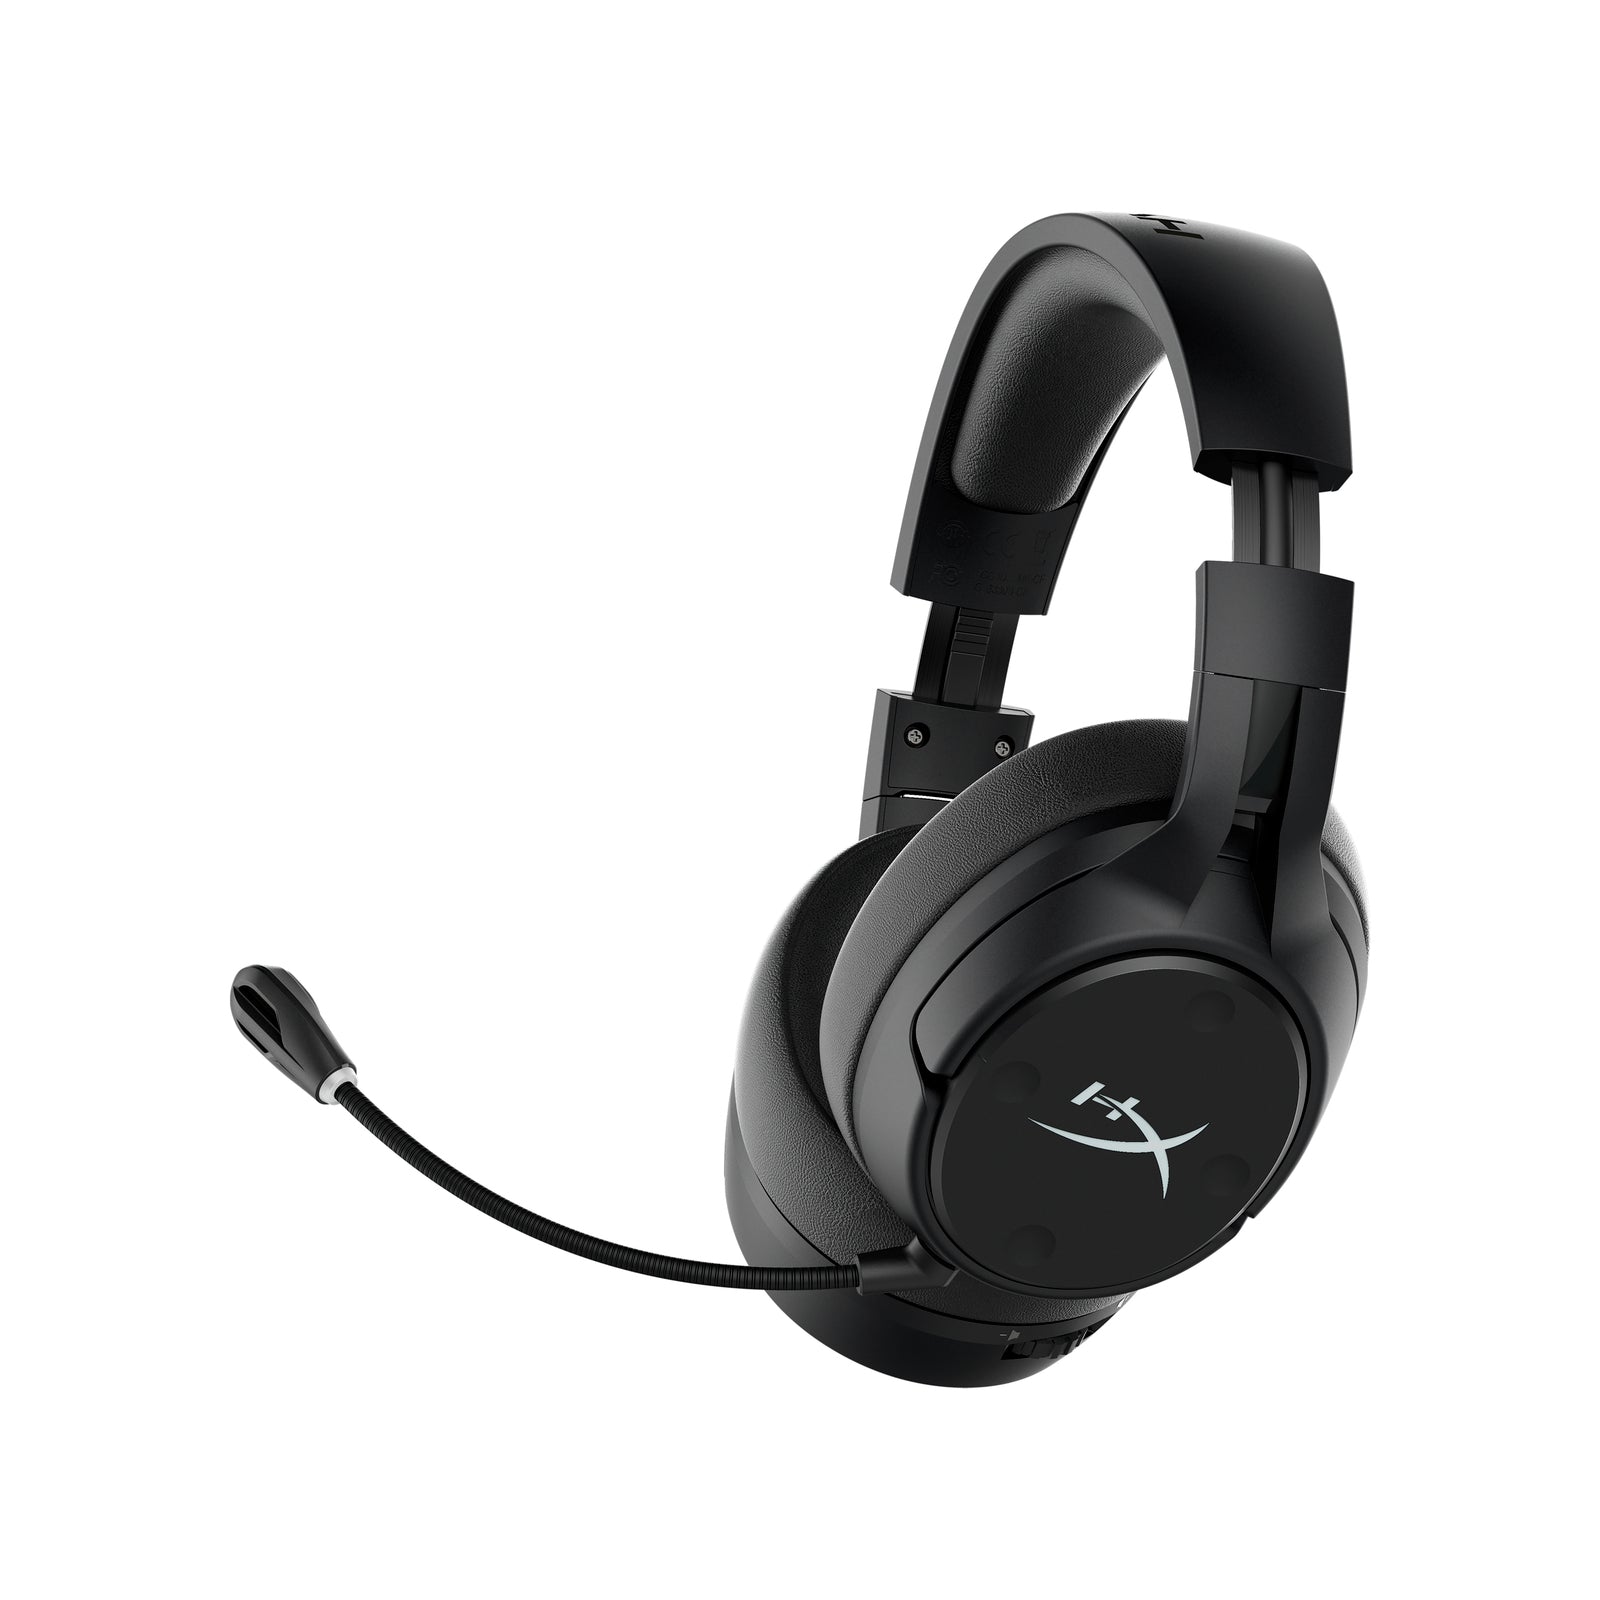 HyperX Cloud Flight - Wireless Gaming Headset, Long Lasting Battery up to  30 Hours, Detachable Noise Cancelling Microphone, Red LED Light,  Comfortable Memory Foam, Works with PC, PS4 & PS5 : Video Games 